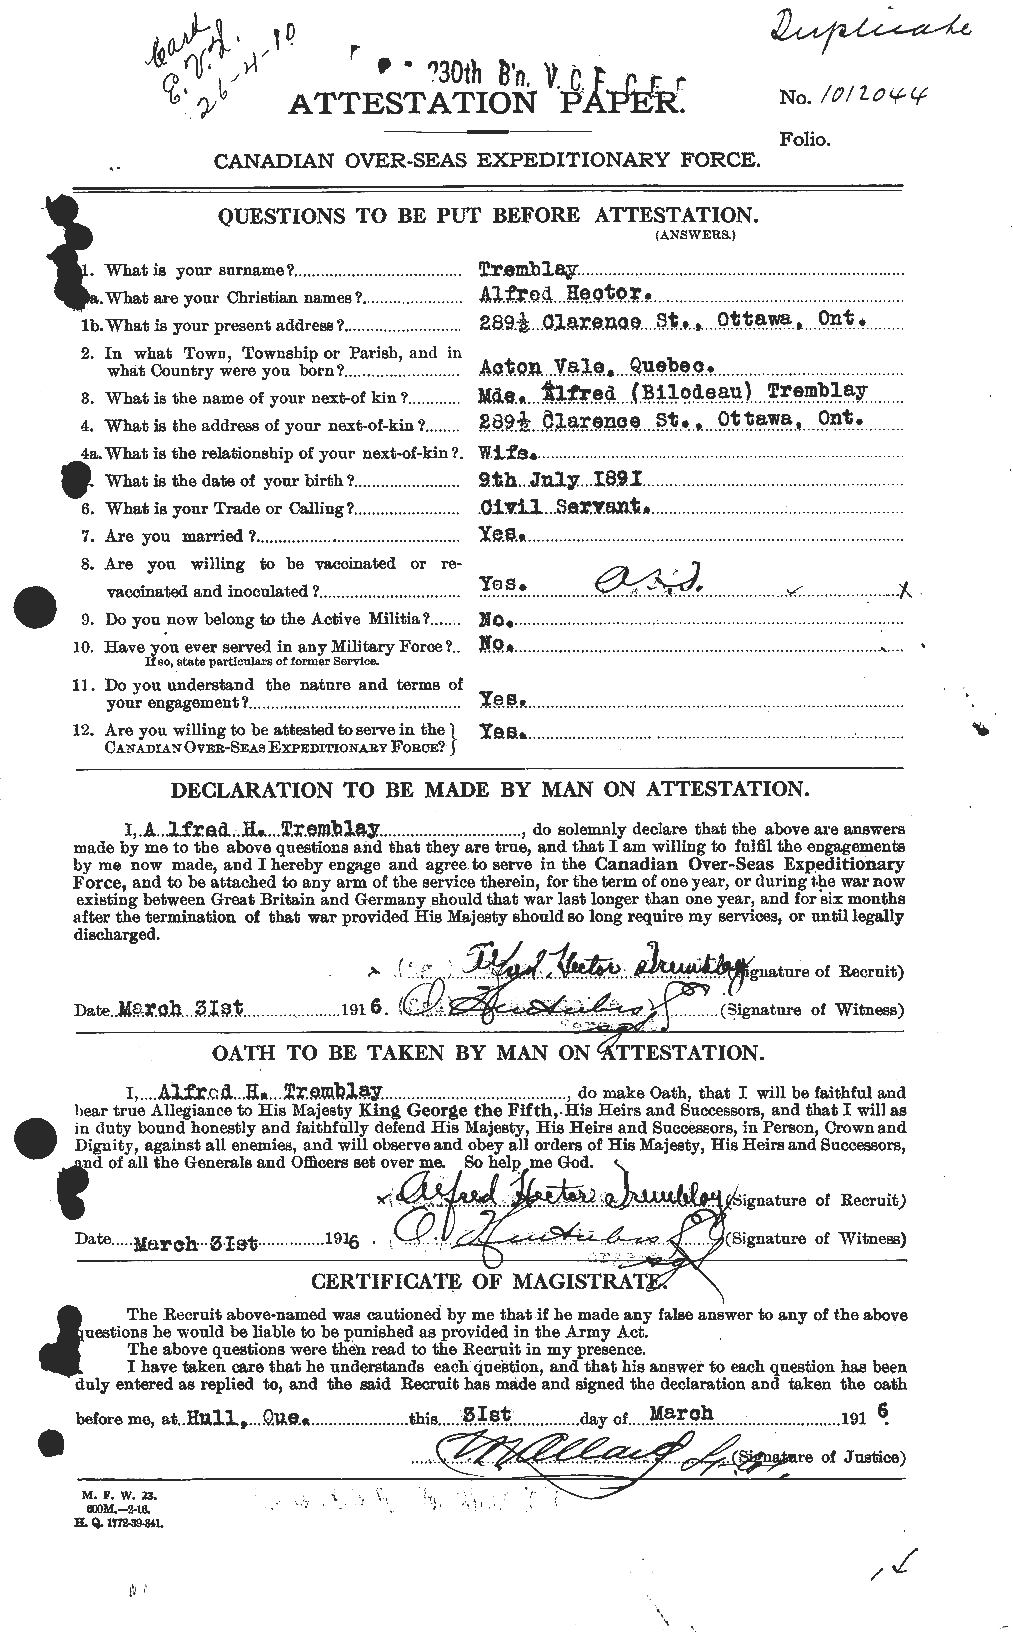 Personnel Records of the First World War - CEF 638926a